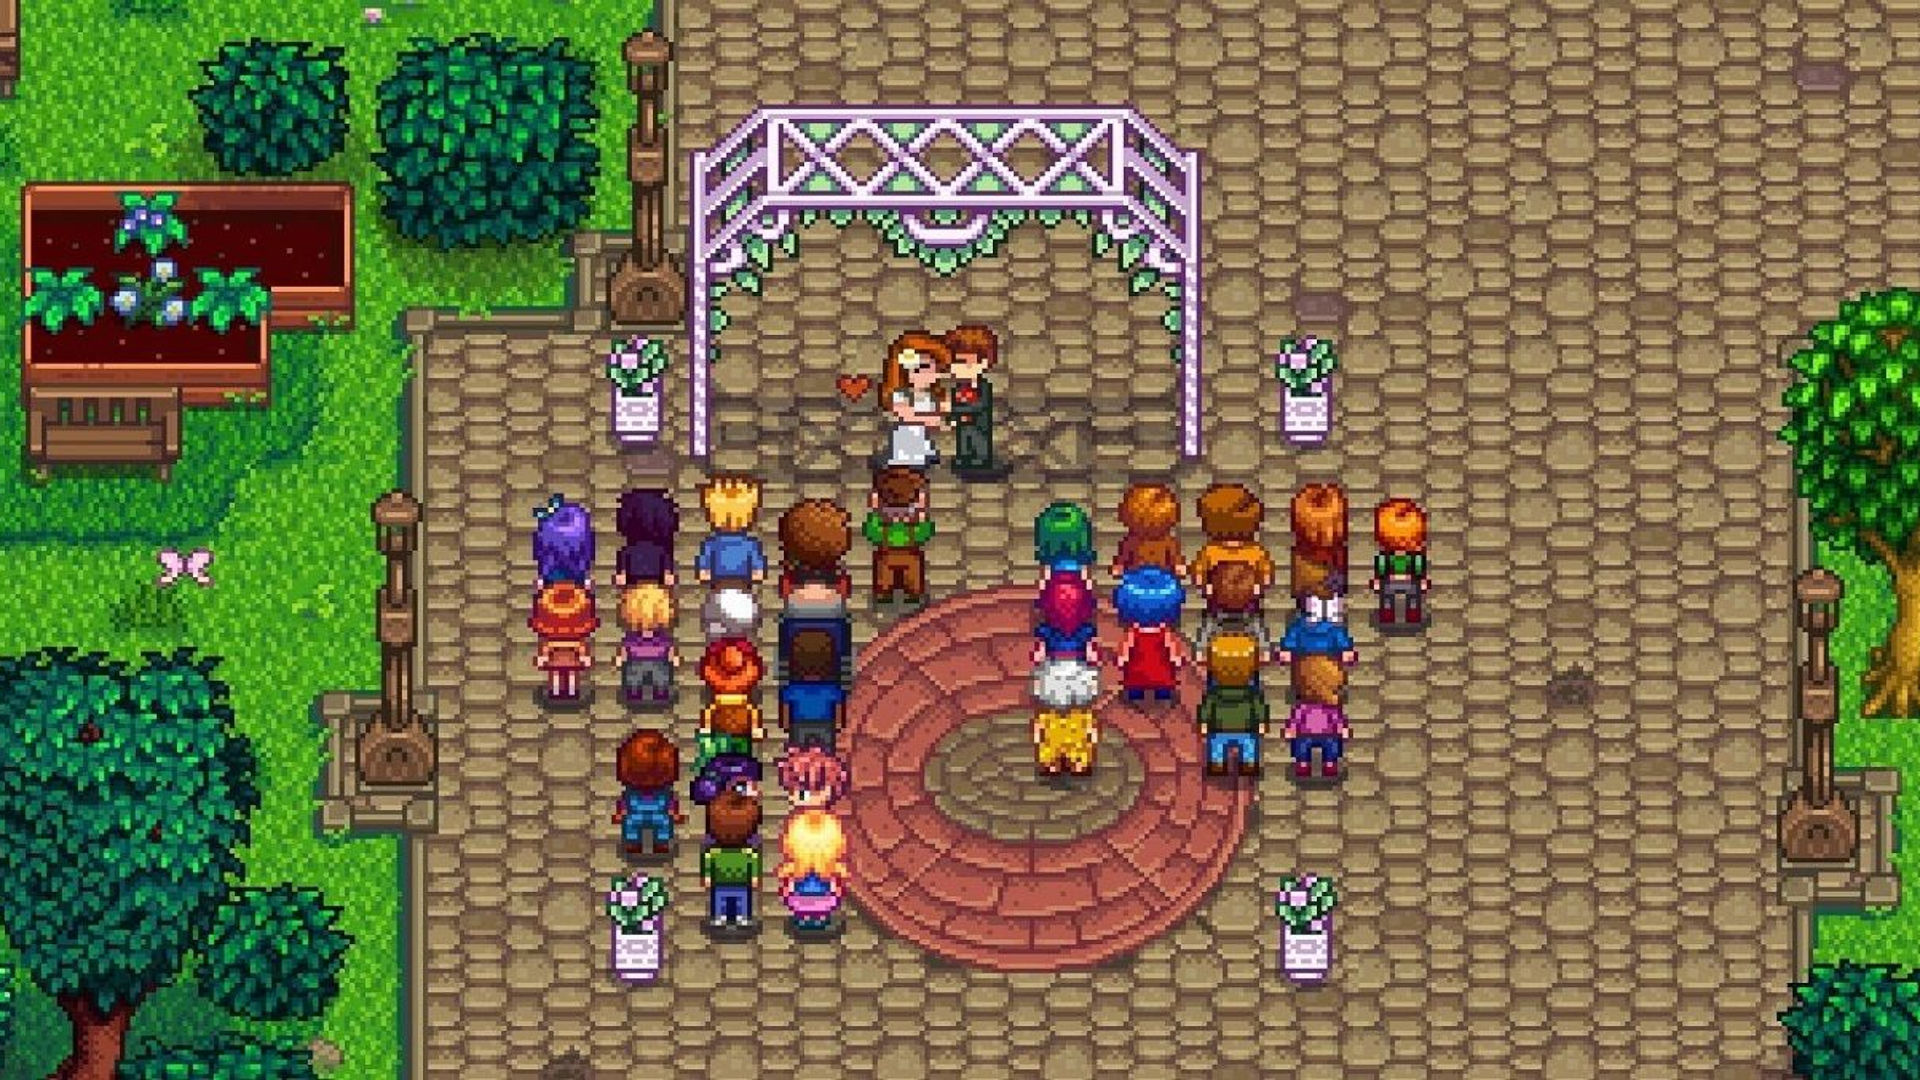 How to host Stardew Valley Co-op multiplayer session? Platforms